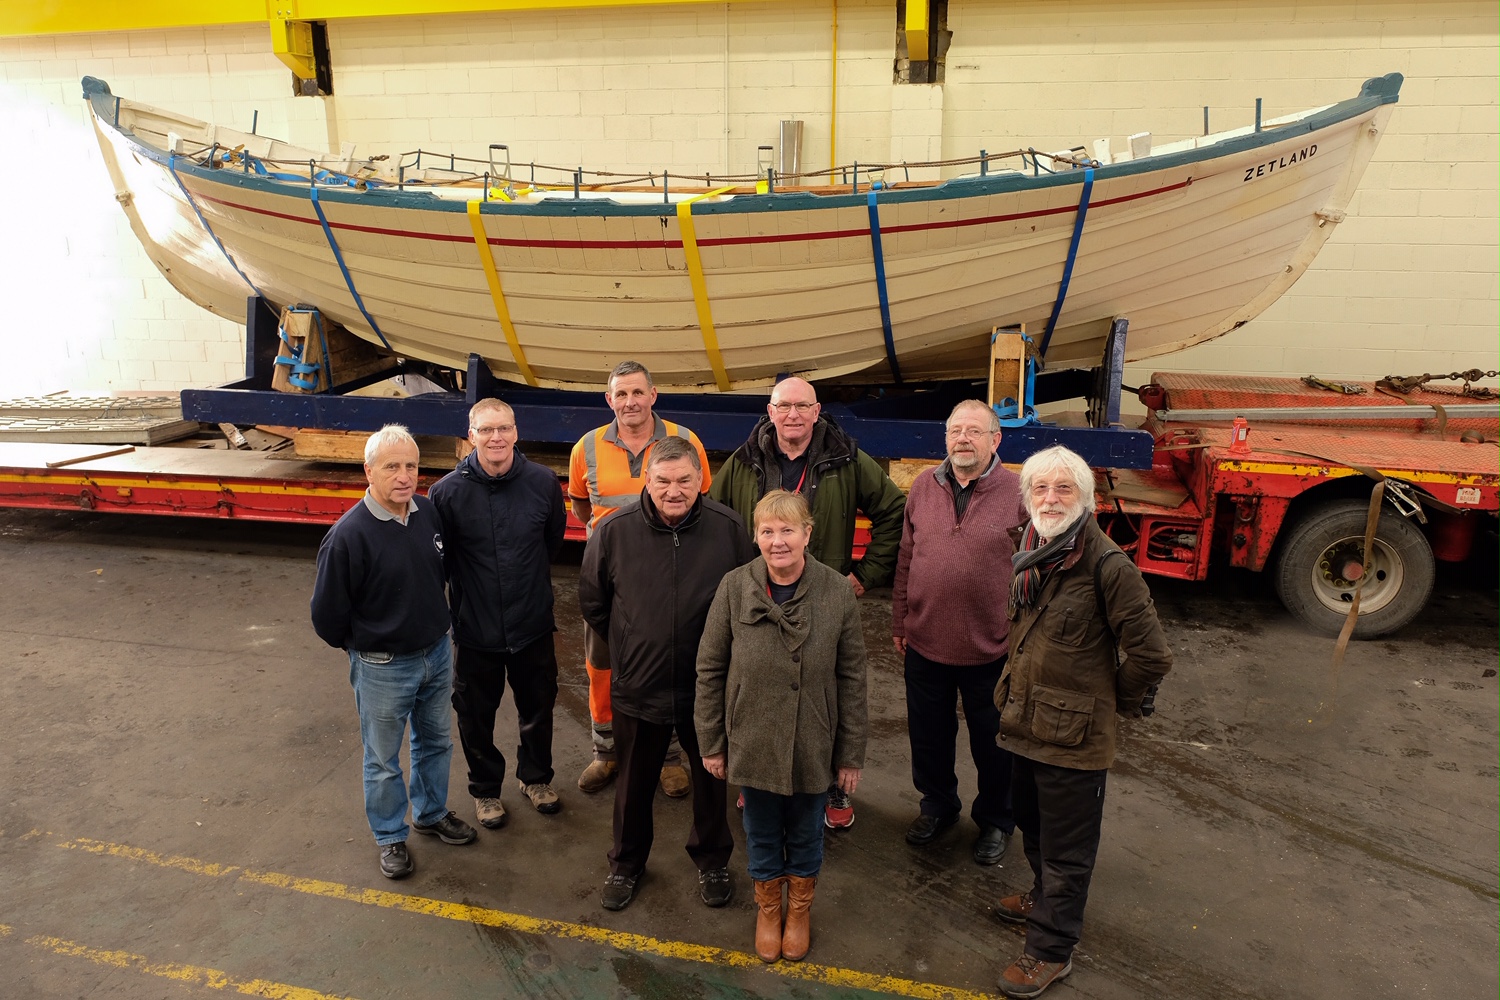 World’s oldest lifeboat journeys to AV Dawson for life-saving conservation project